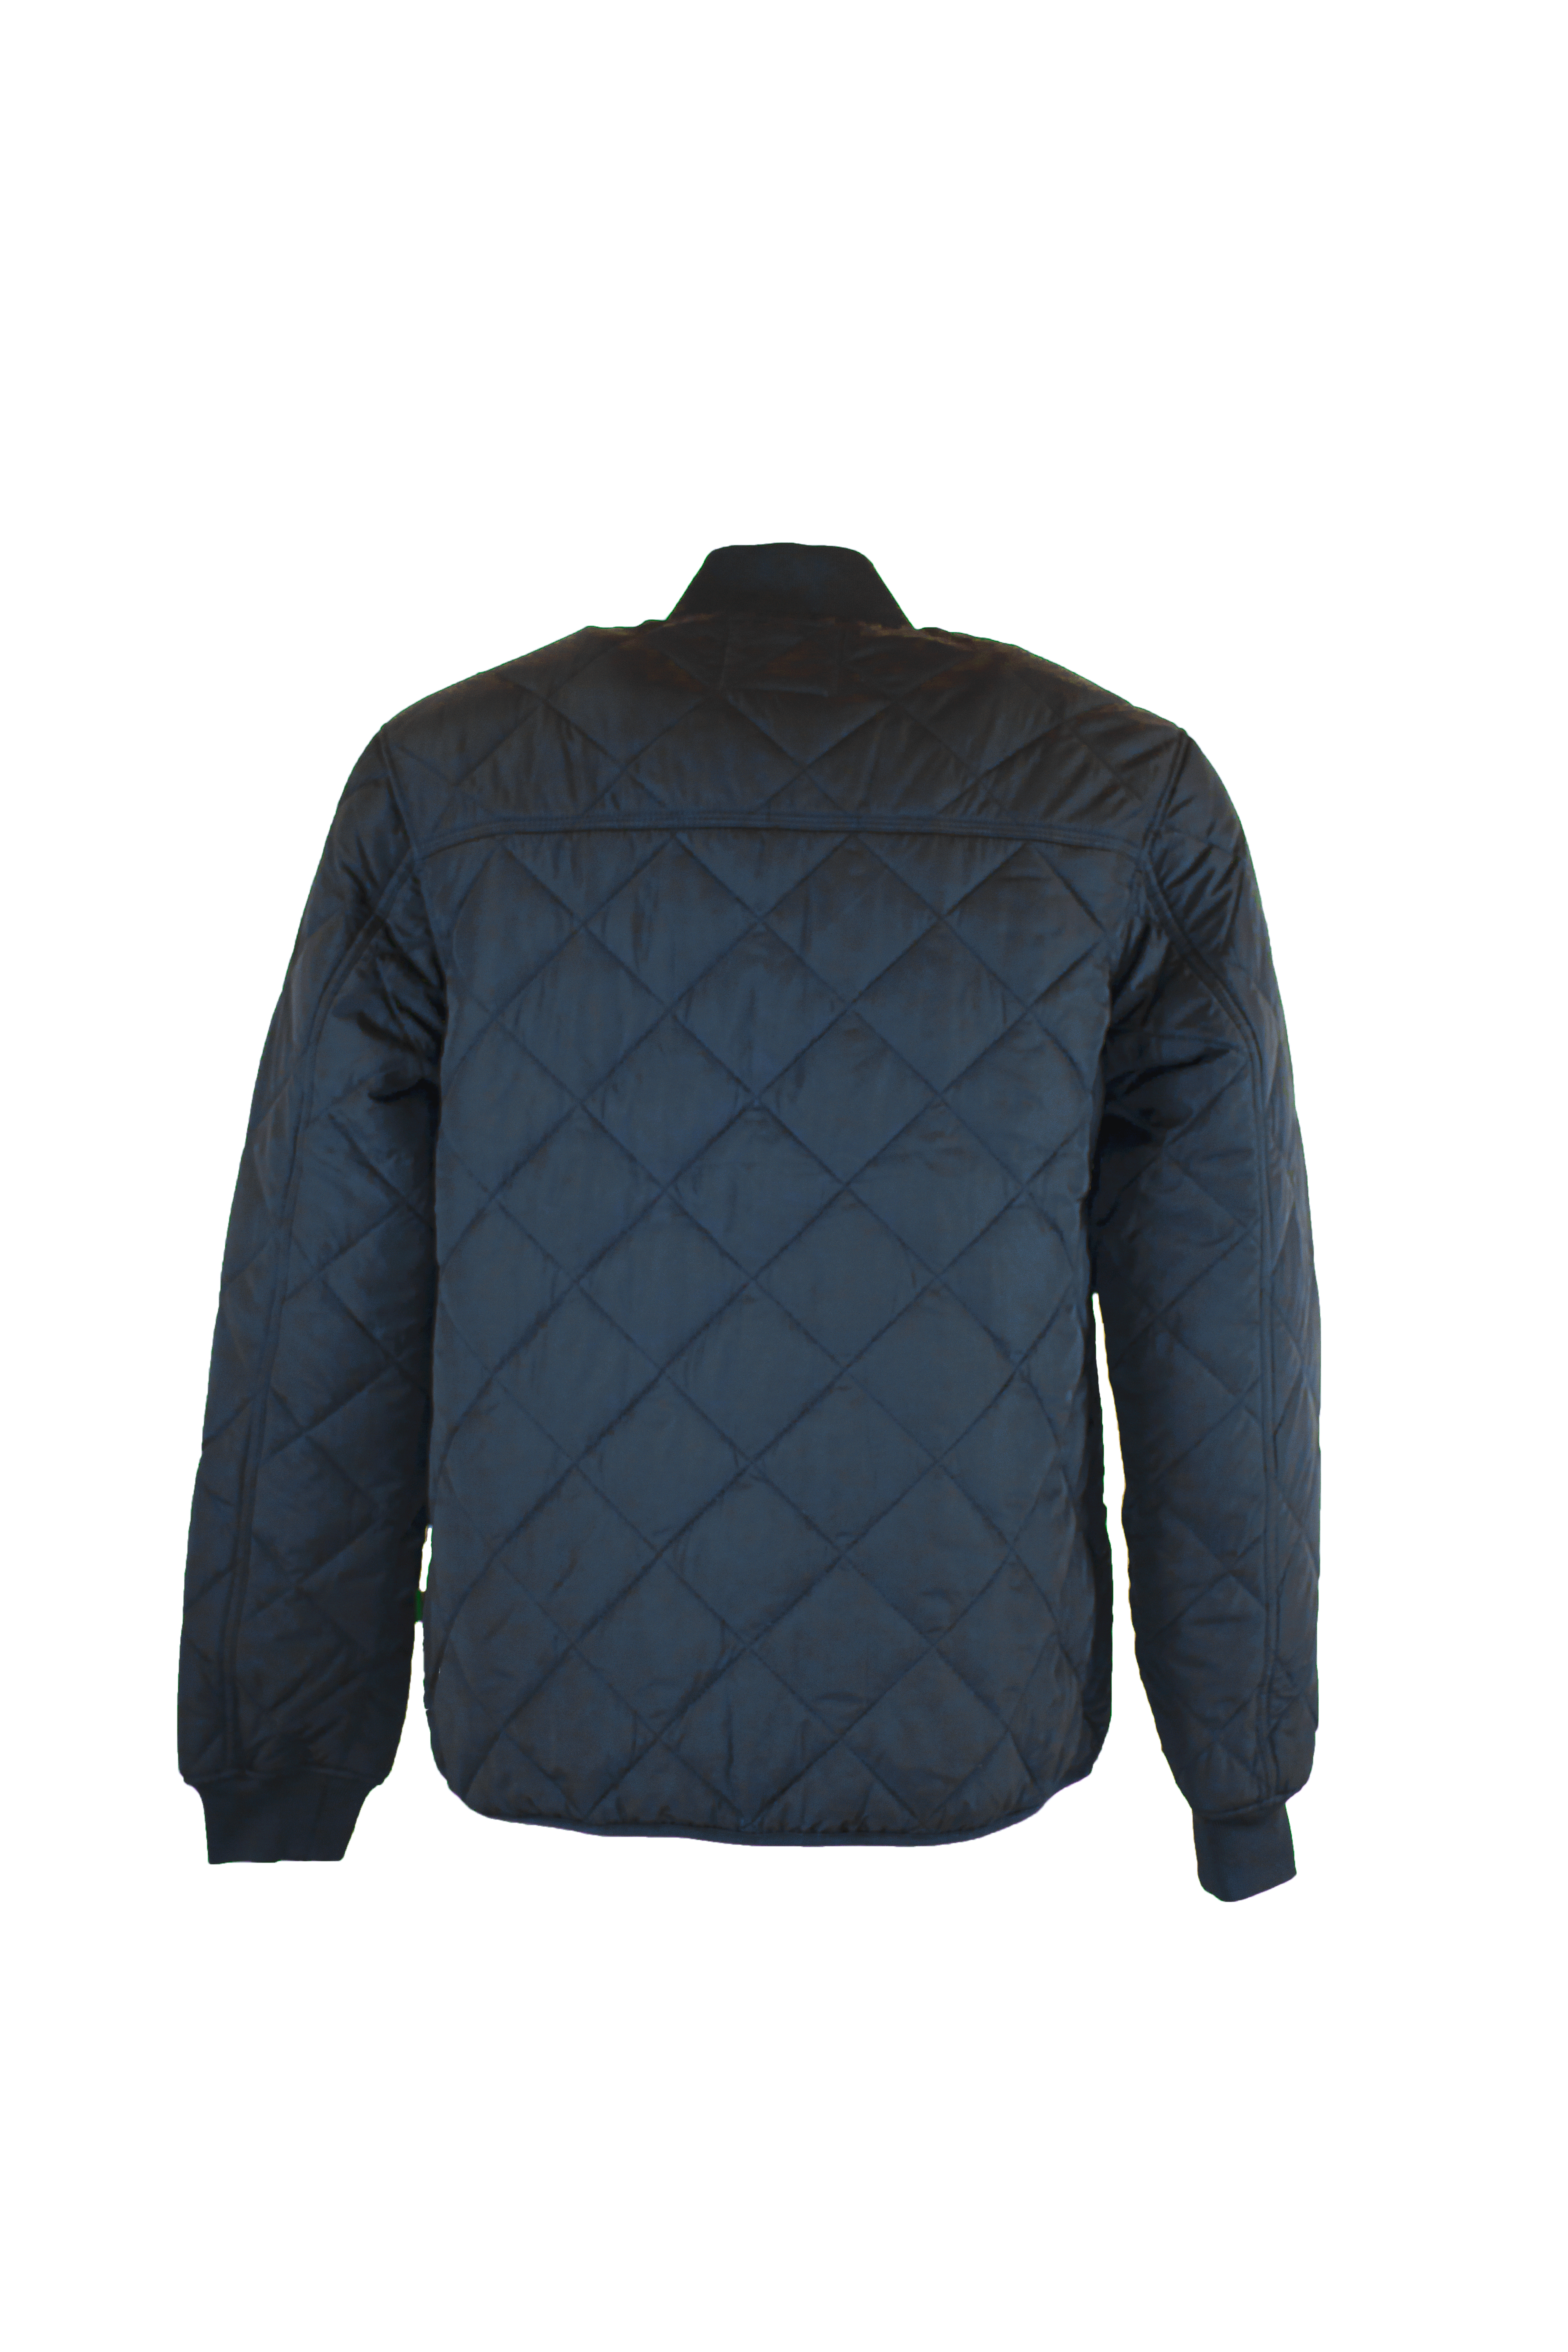 MJ005 - Men's Keswick Quilted Jacket - NAVY